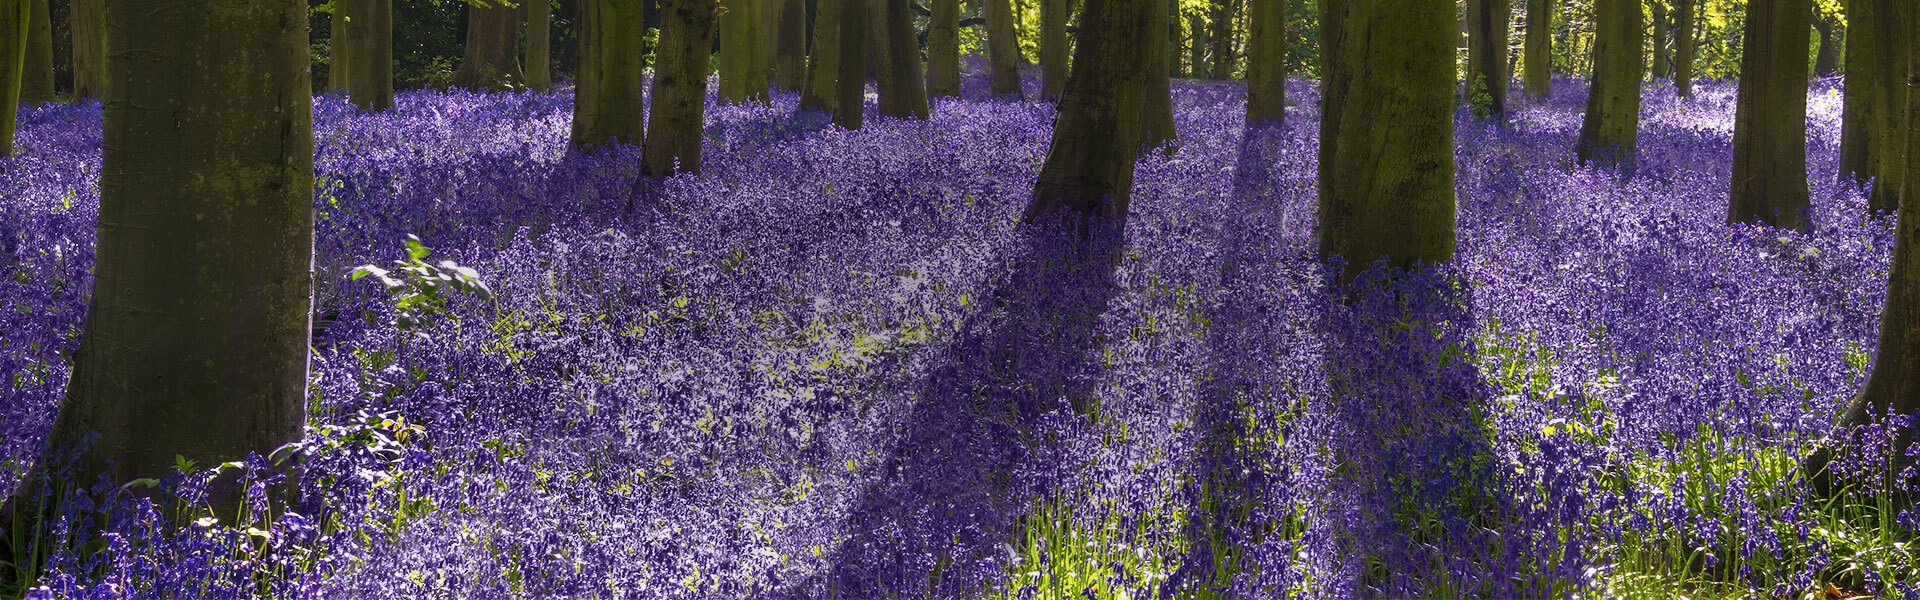 Wide angle of sun rays falling on sea of bluebells in woods